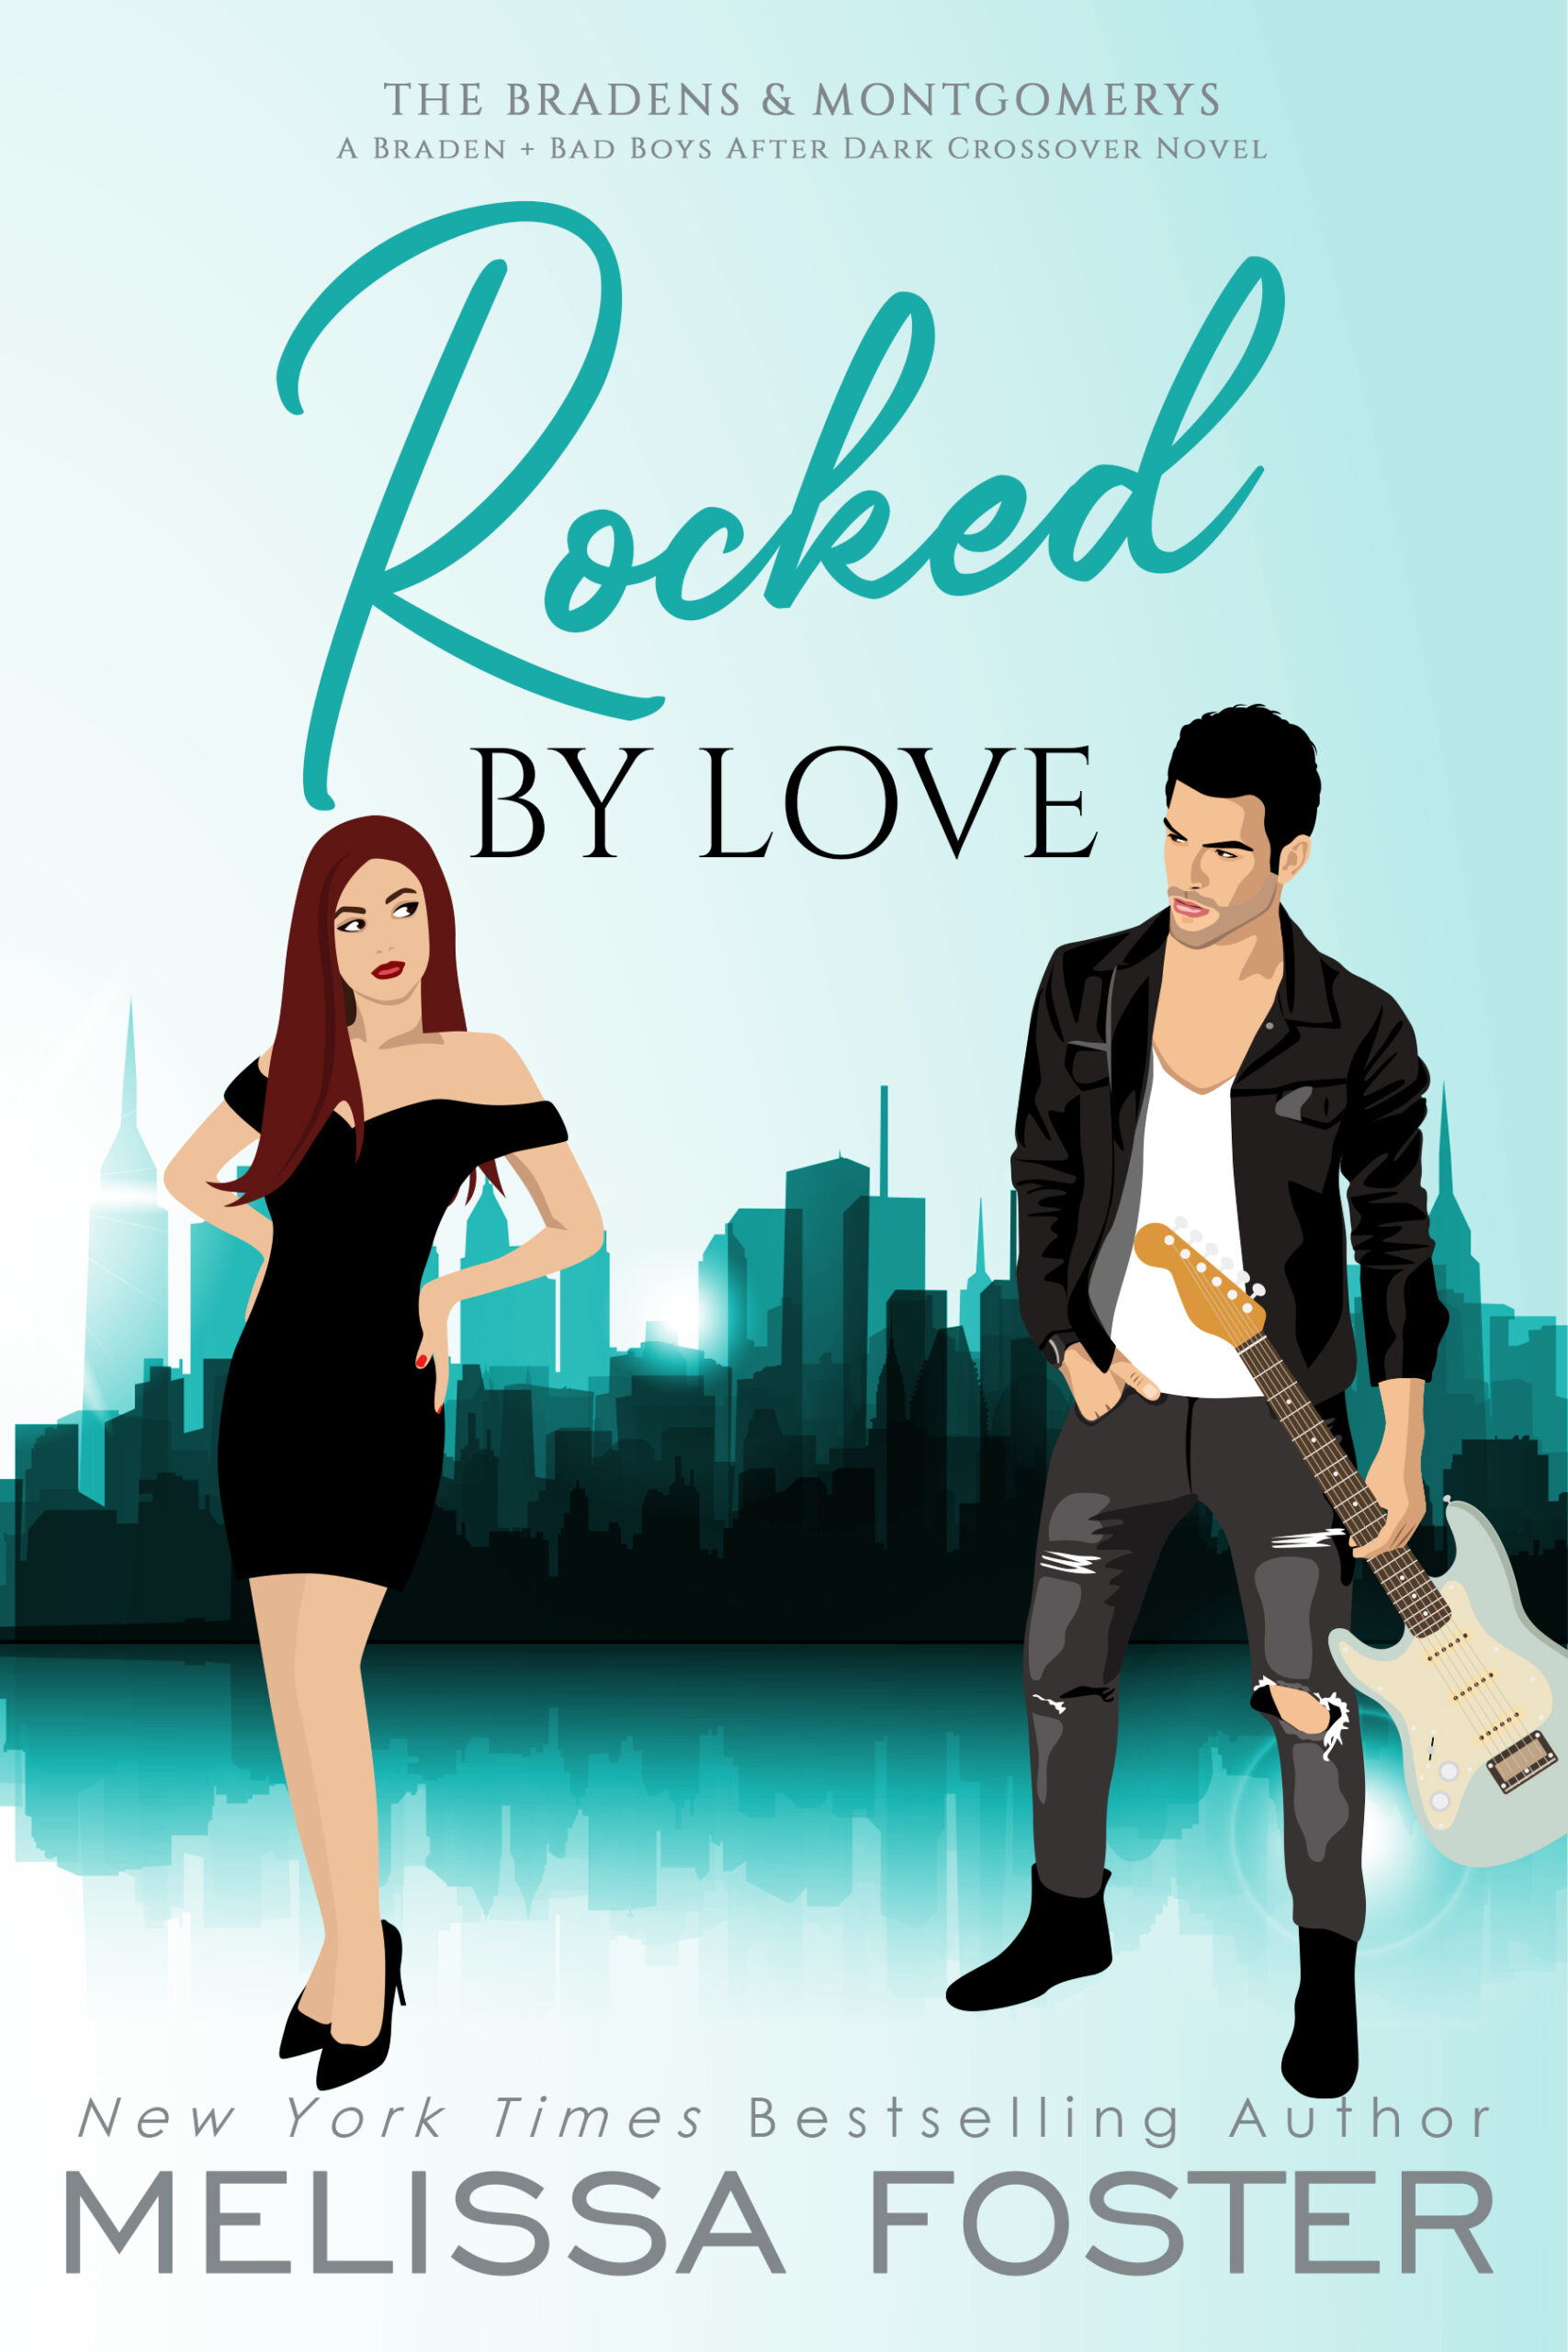 Rocked by Love special edition by Melissa Foster